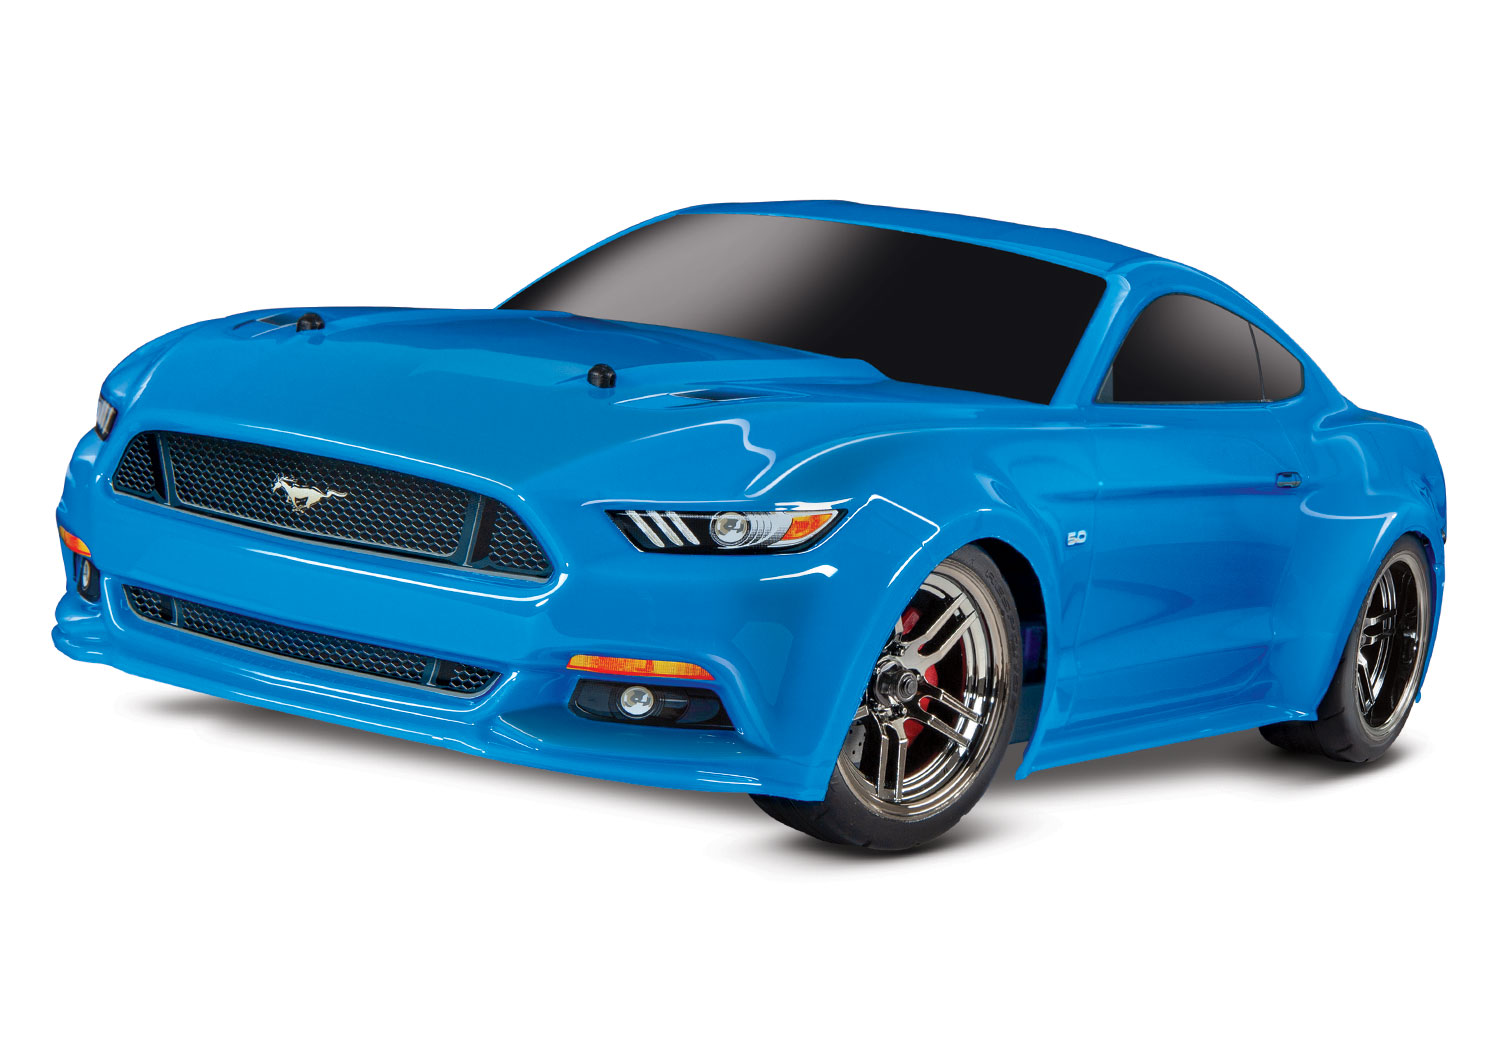 Traxxas Ford Mustang GT 4Tec 2.0 onroad RTR - Blauw